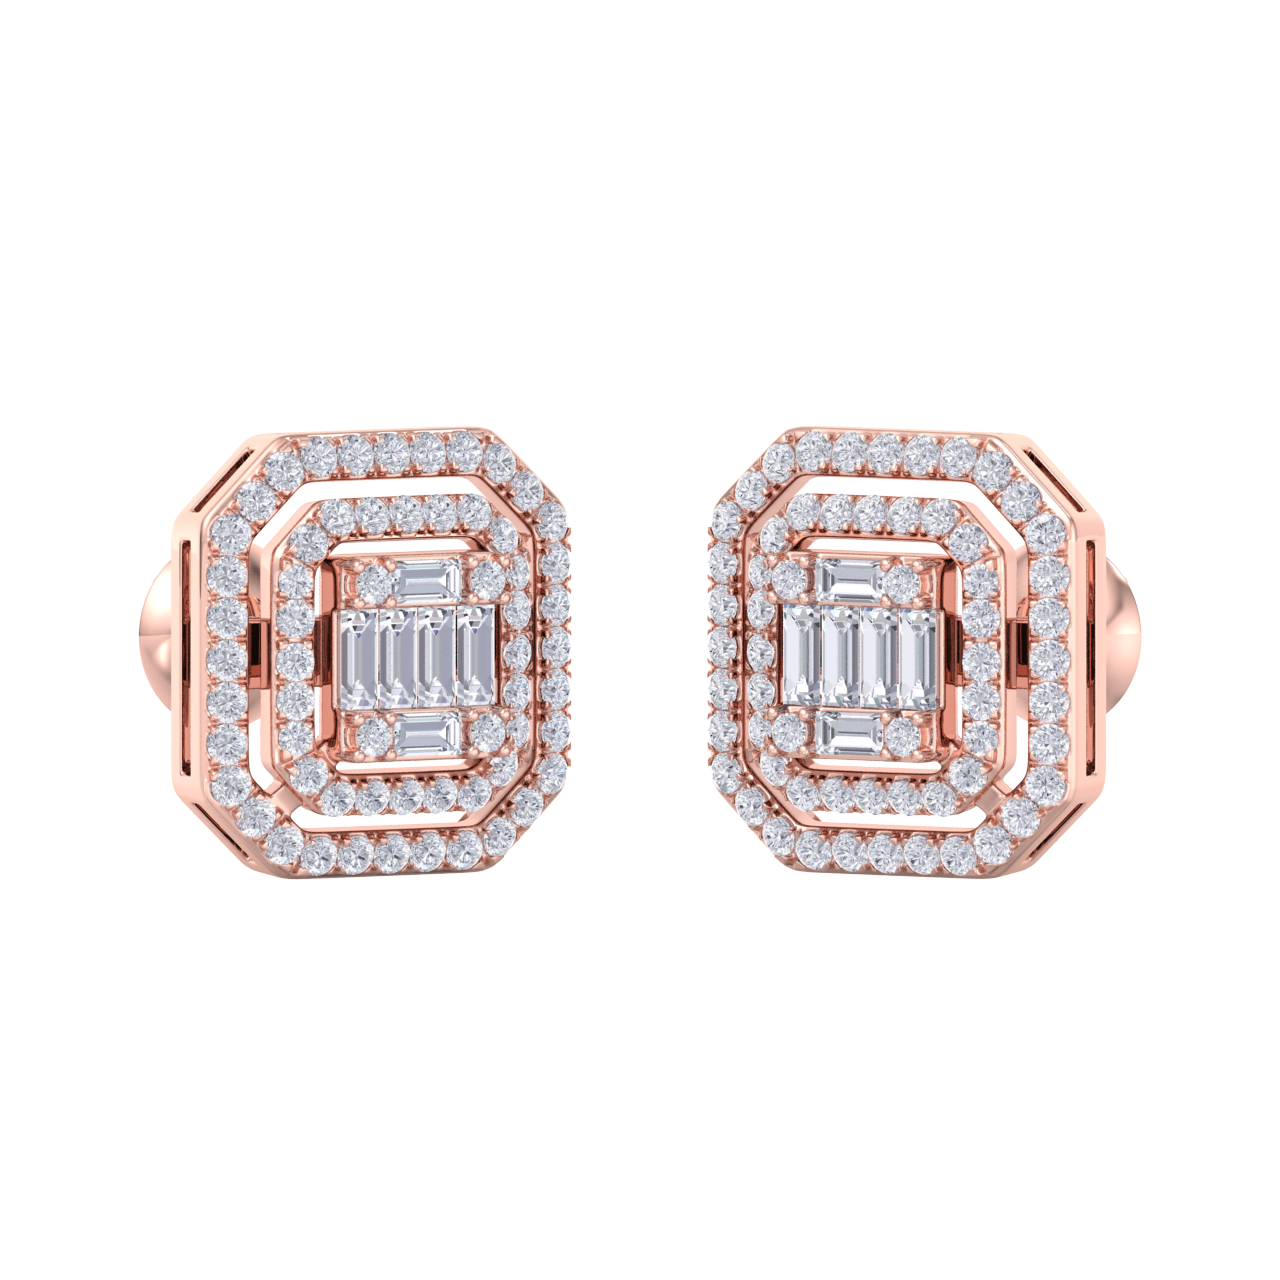 Square stud earrings in yellow gold with white diamonds of 0.87 ct in weight